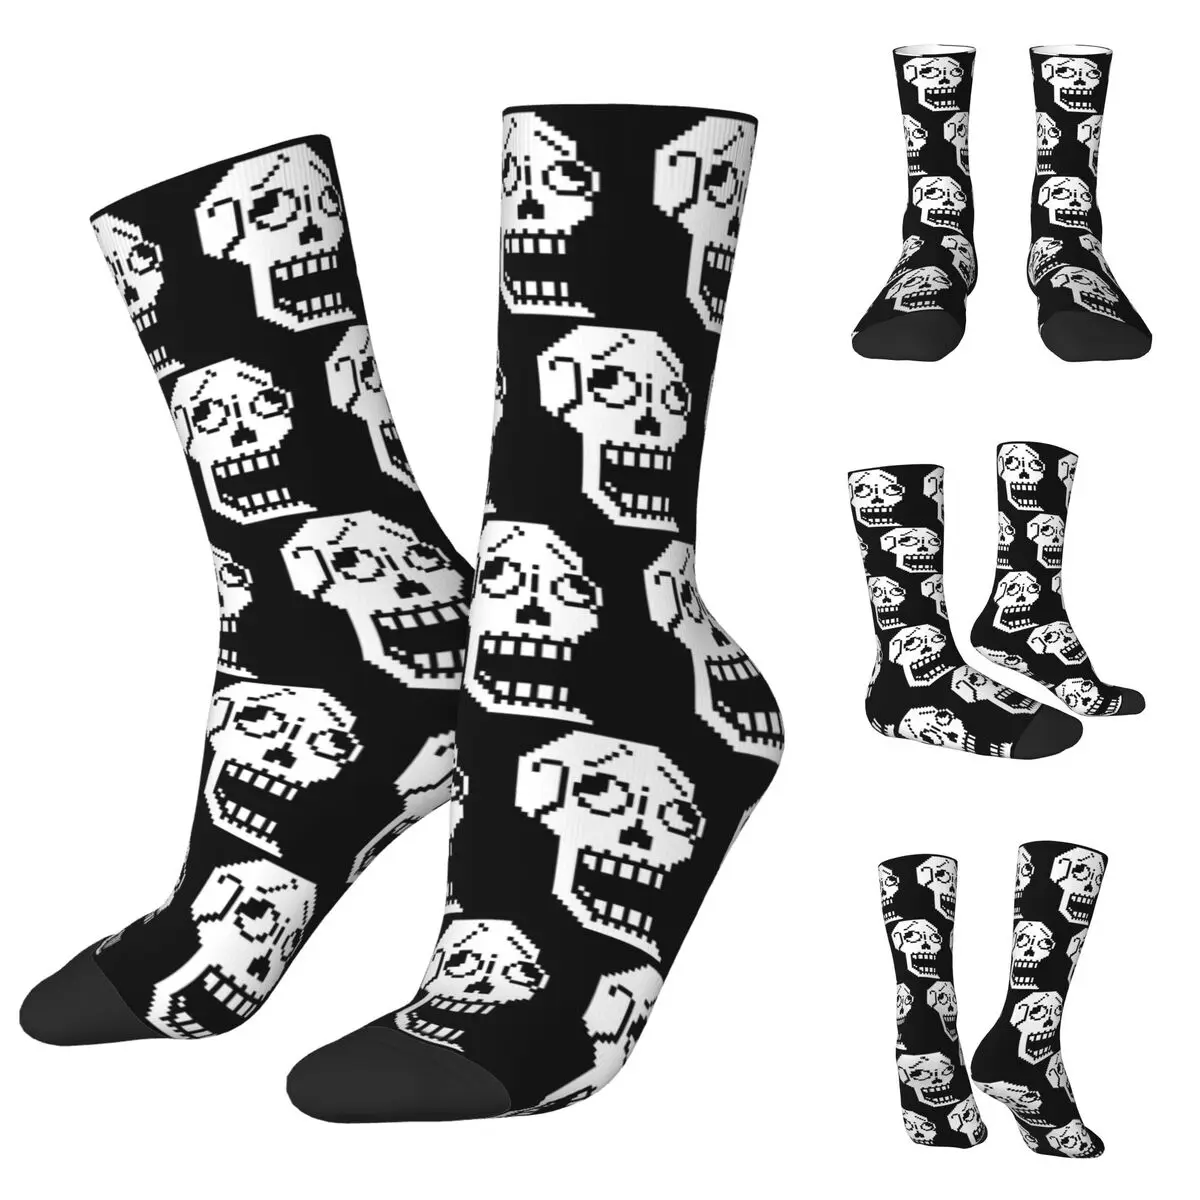 Sans And Papyrus Sprites Undertale Napstablook Men and Women printing Socks,Windproof Applicable throughout the year custom sake custom printing shelf cardboard floor stand display paper tiered display stand for yoga rope socks mats bricks